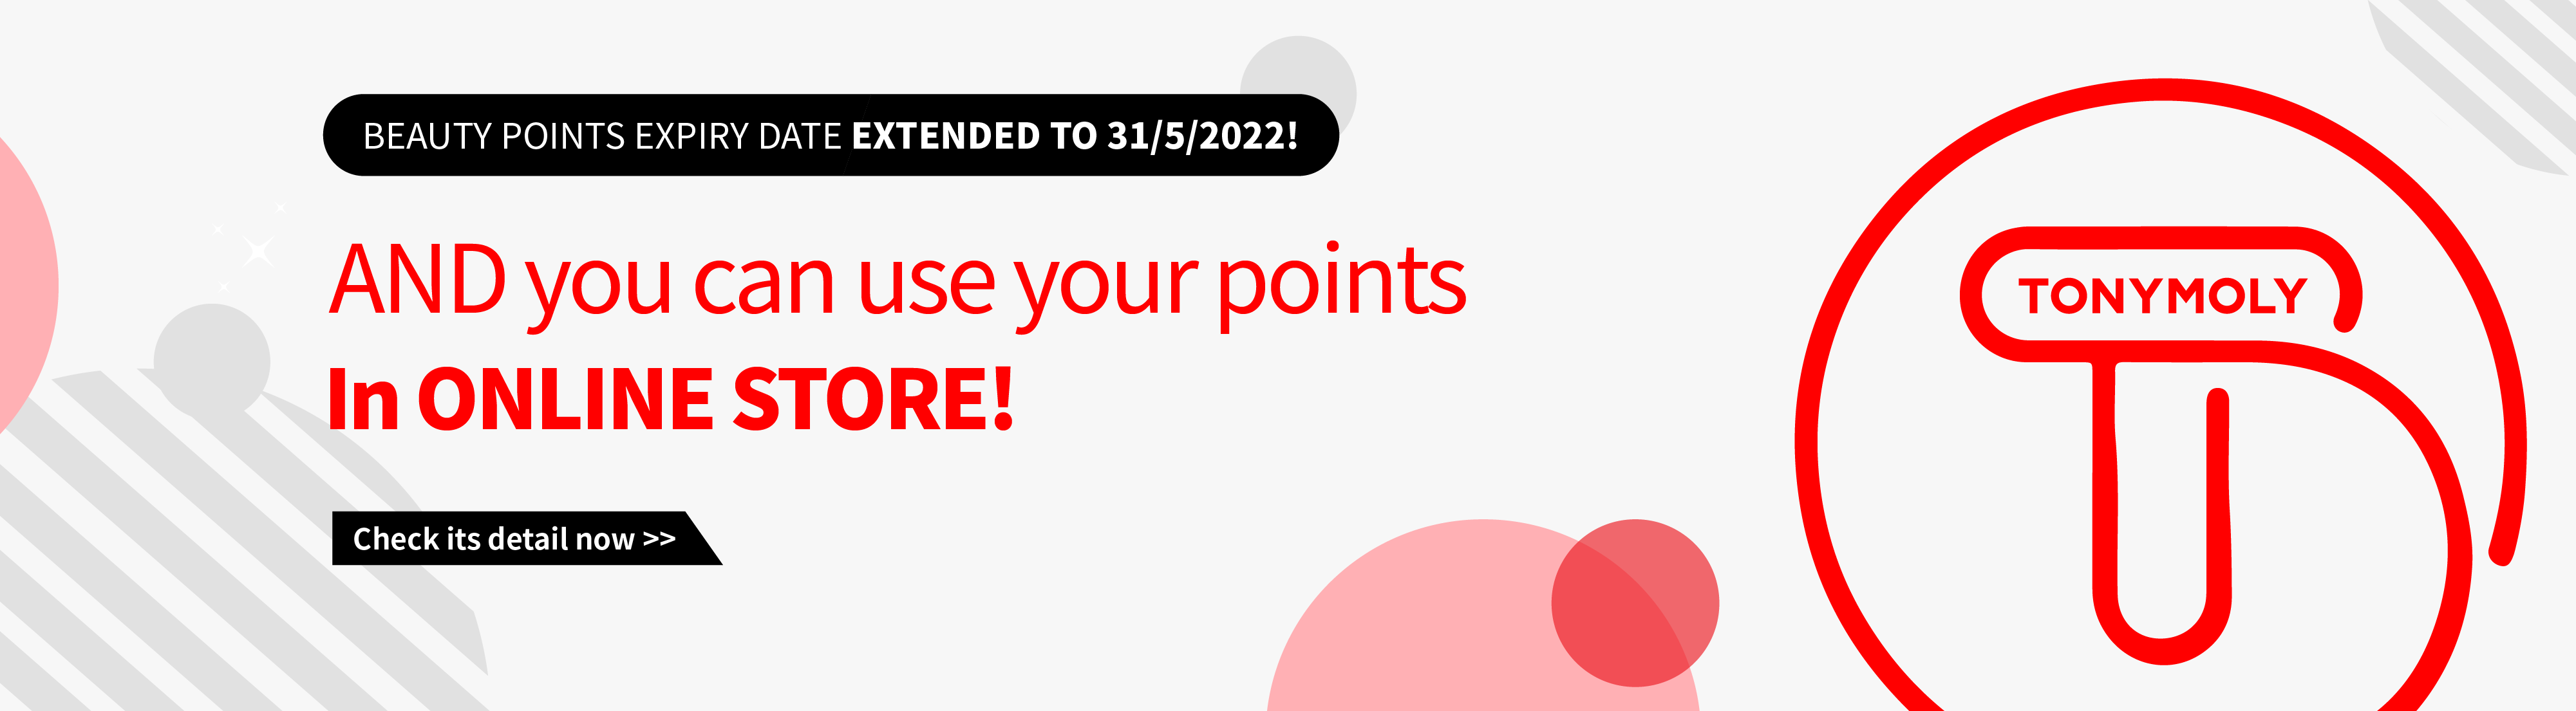 You can use your points IN ONLINE STORE!